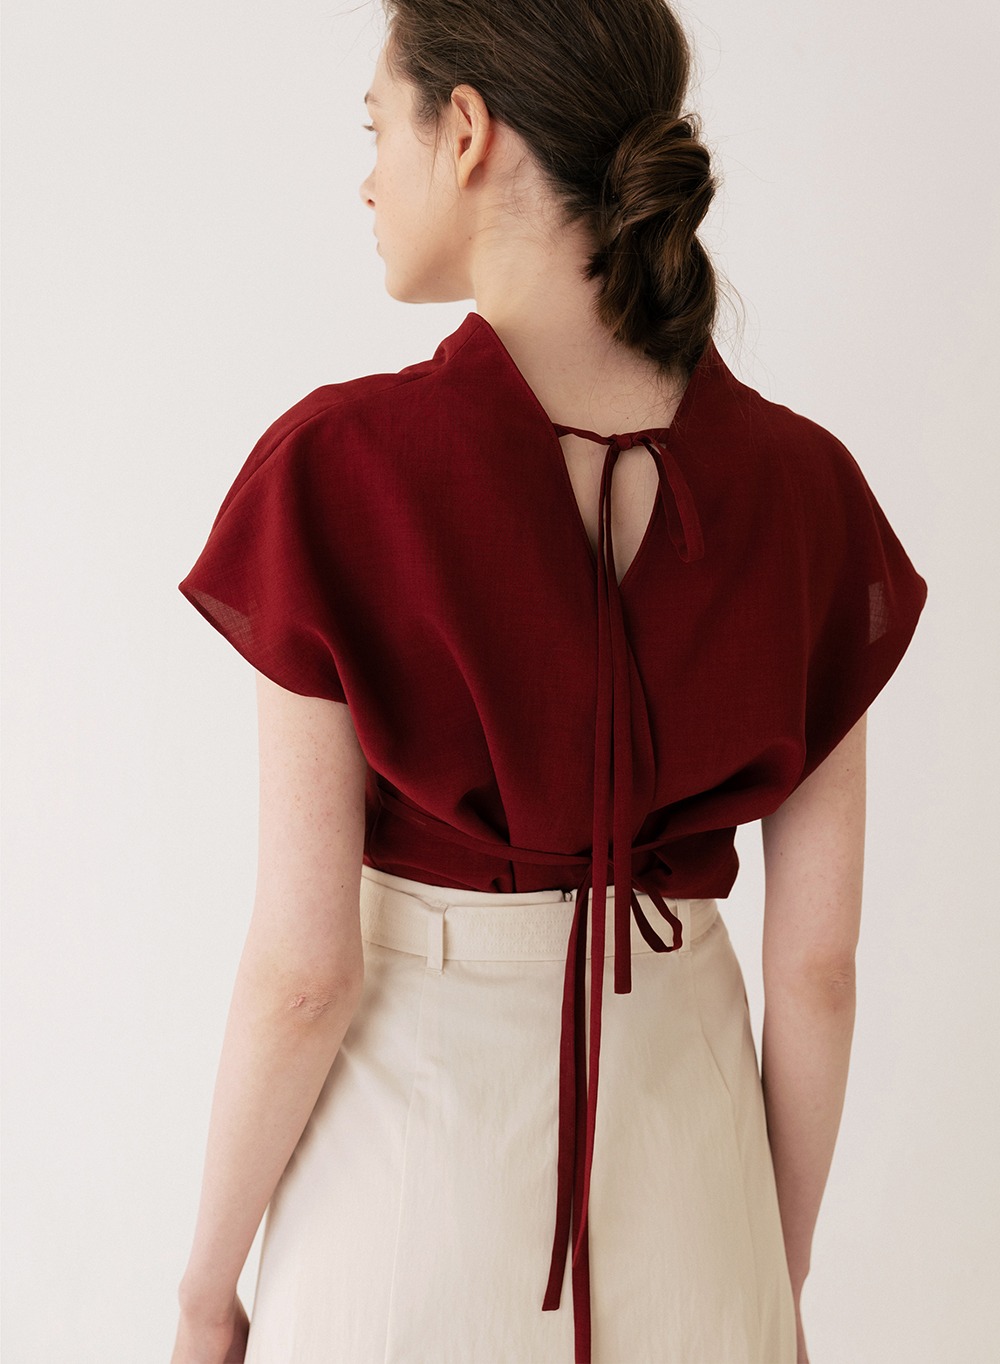 Tunic Top Burgundy-red